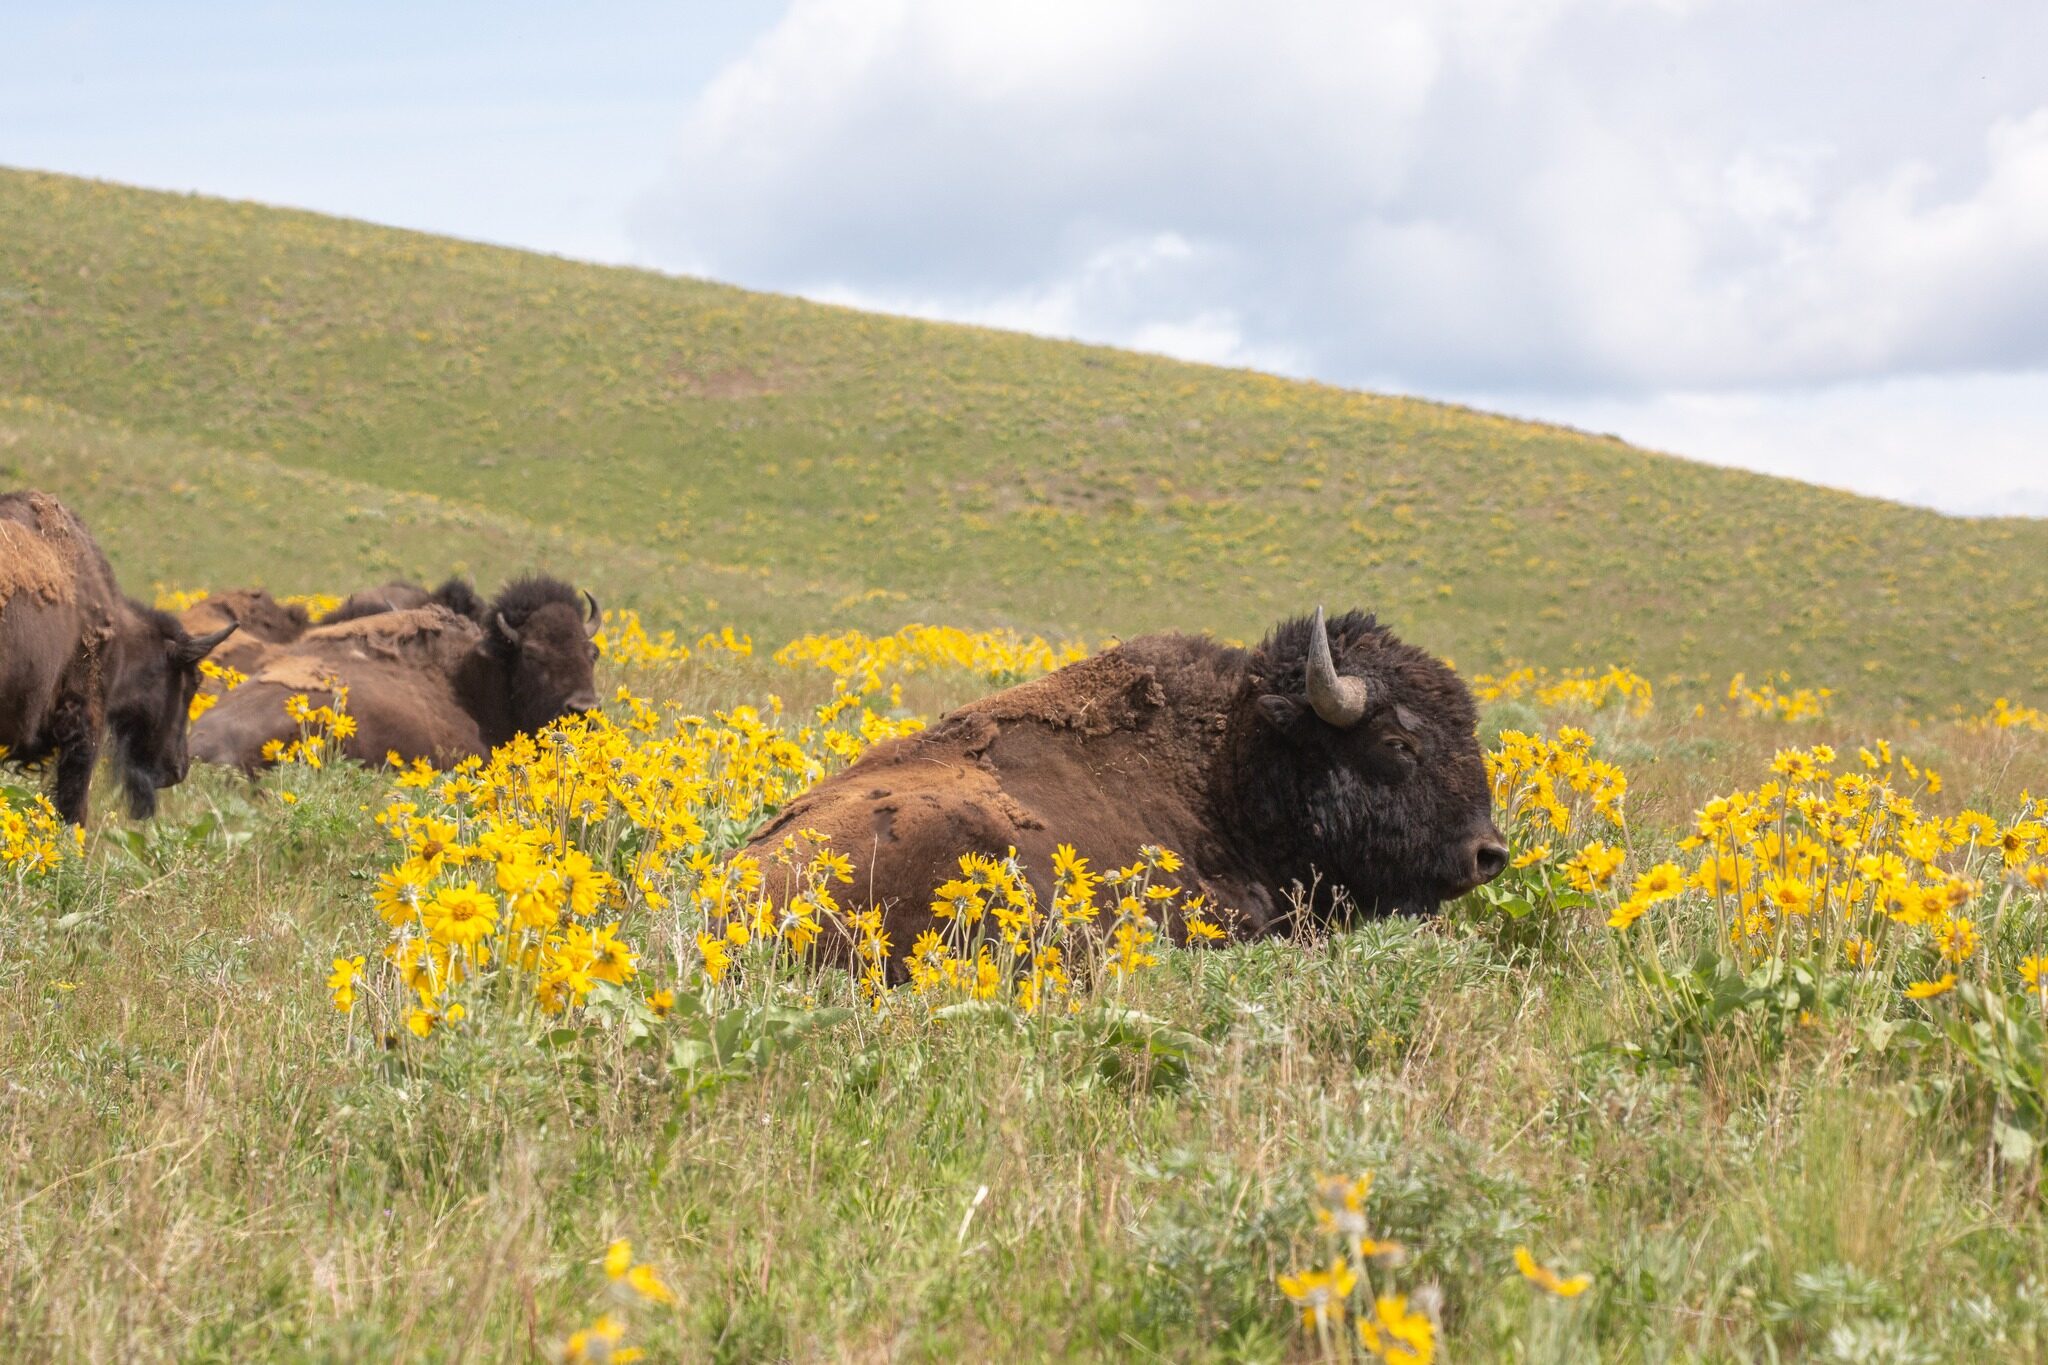 A bison enjoying a rest in the beautiful flowers on the Bison Range on the LCNHT